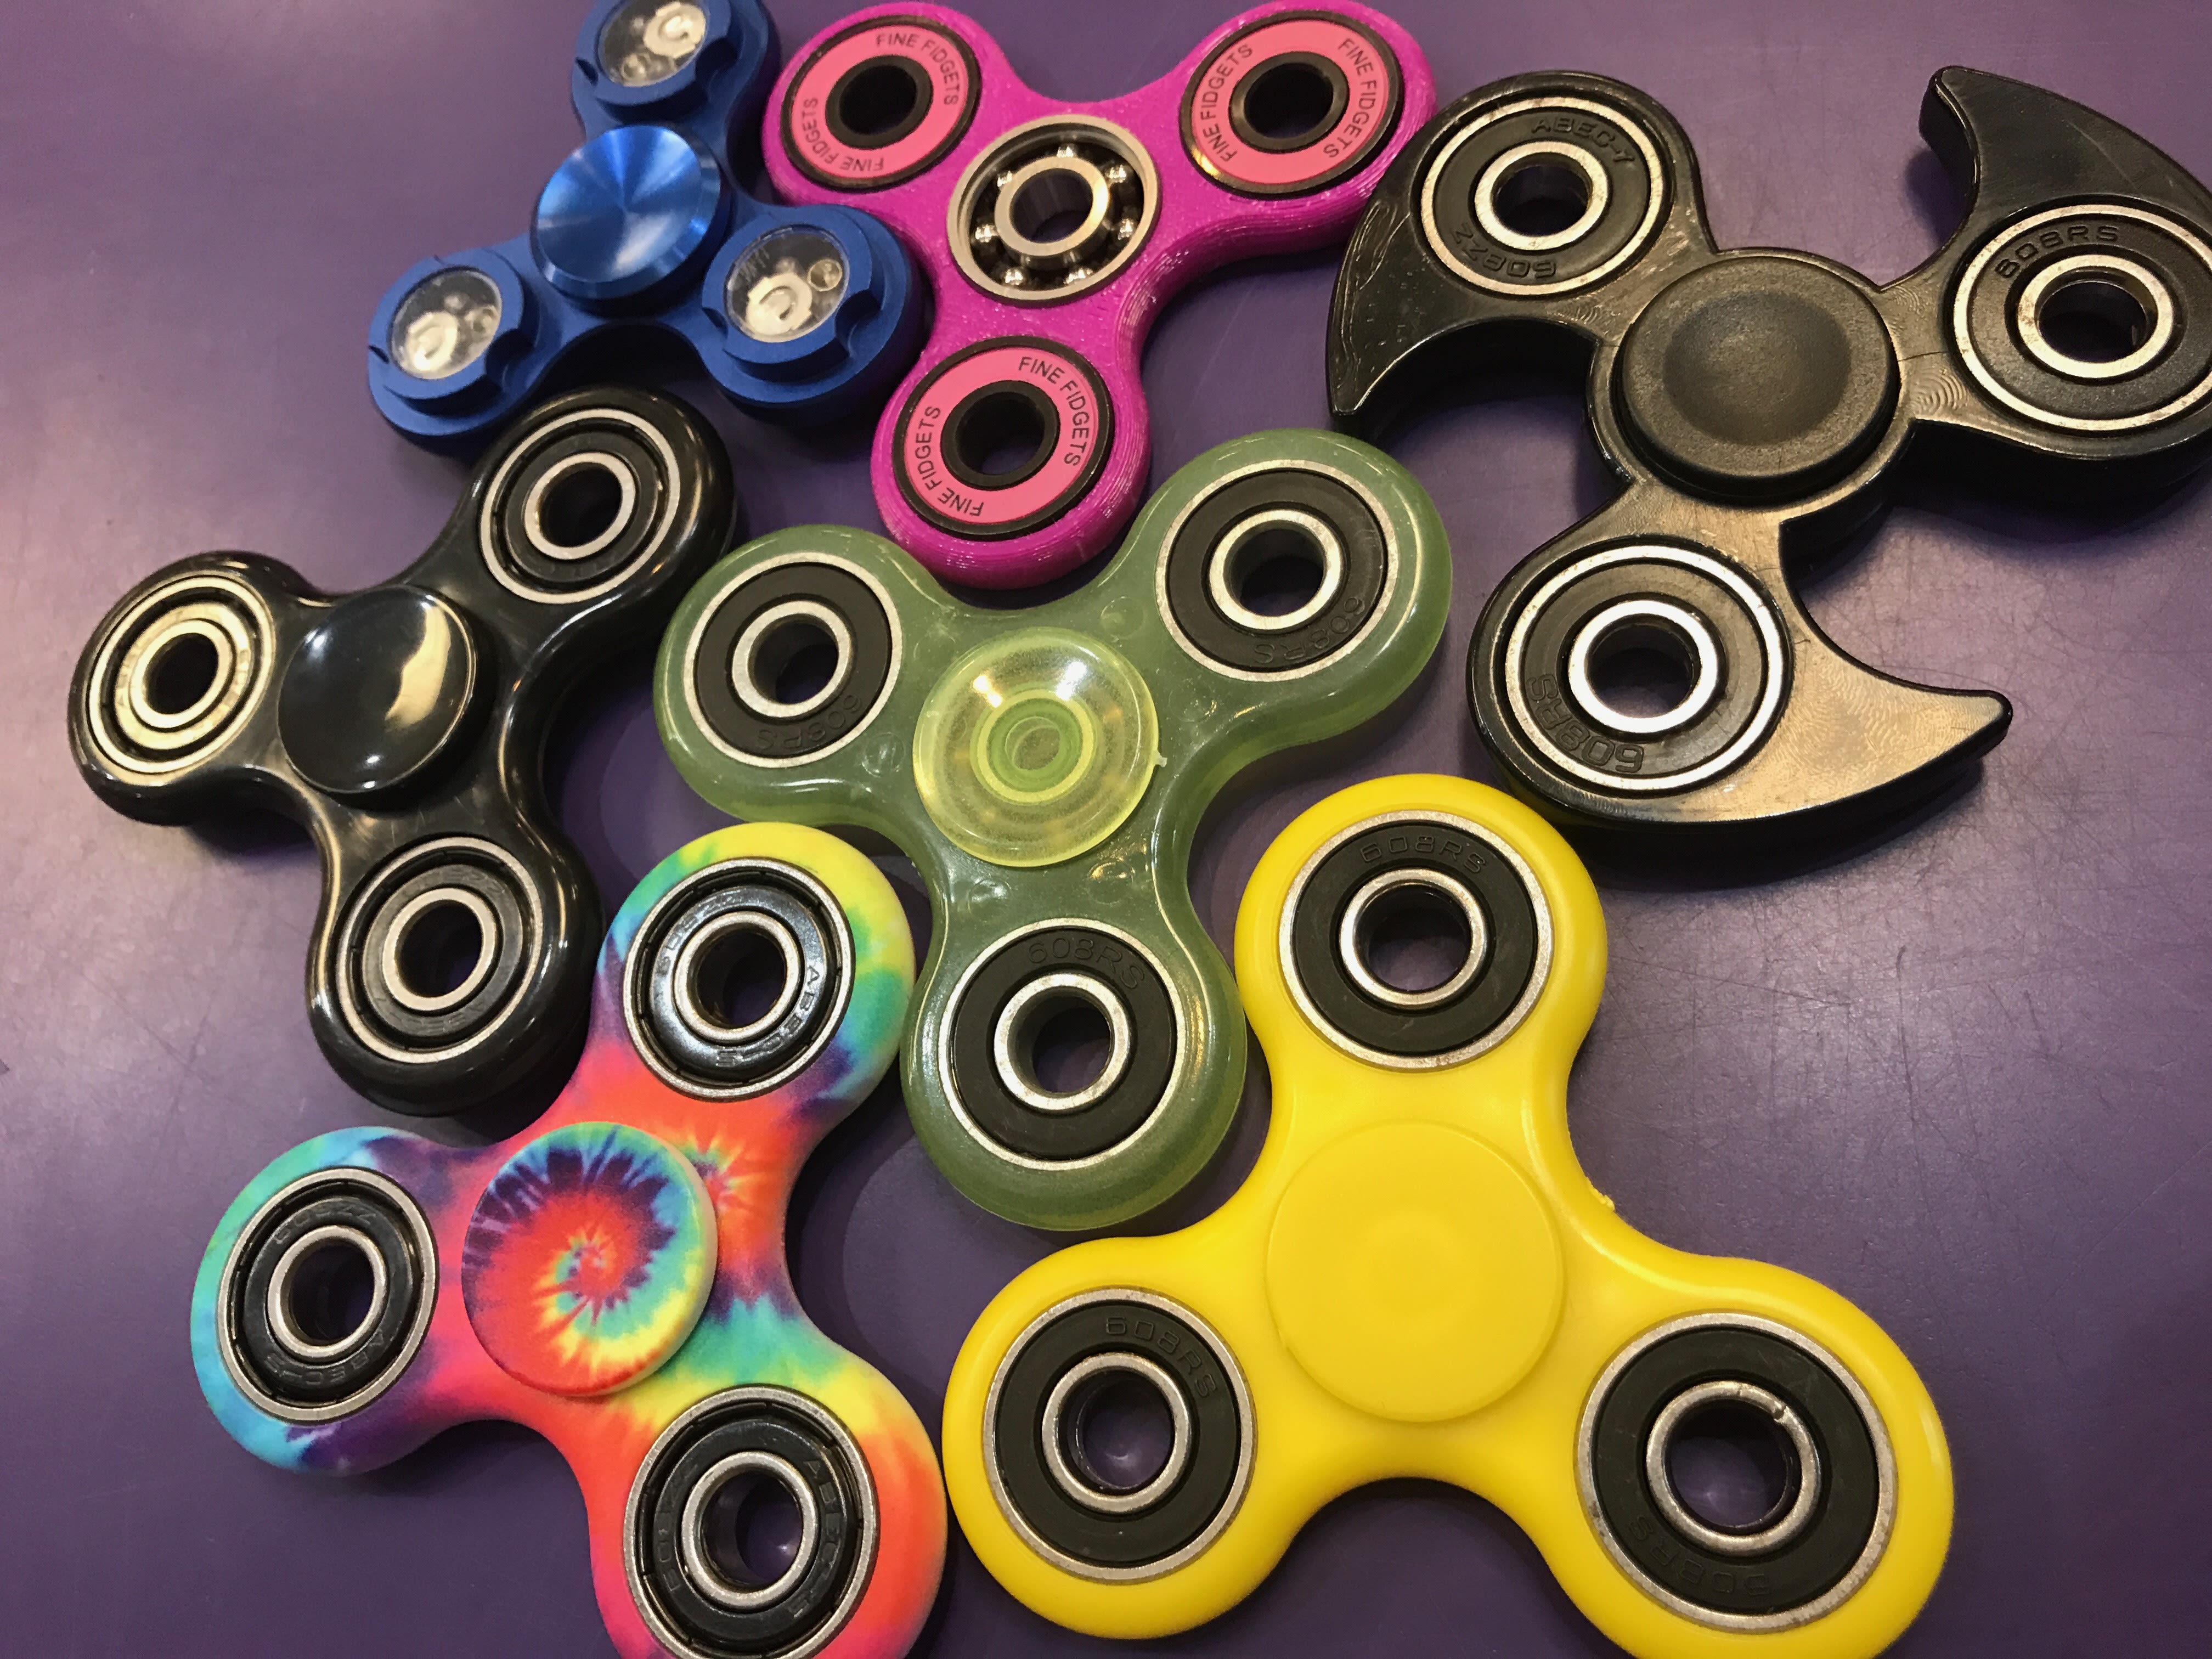 Fidget fad: Adults get and that's the point | CNN